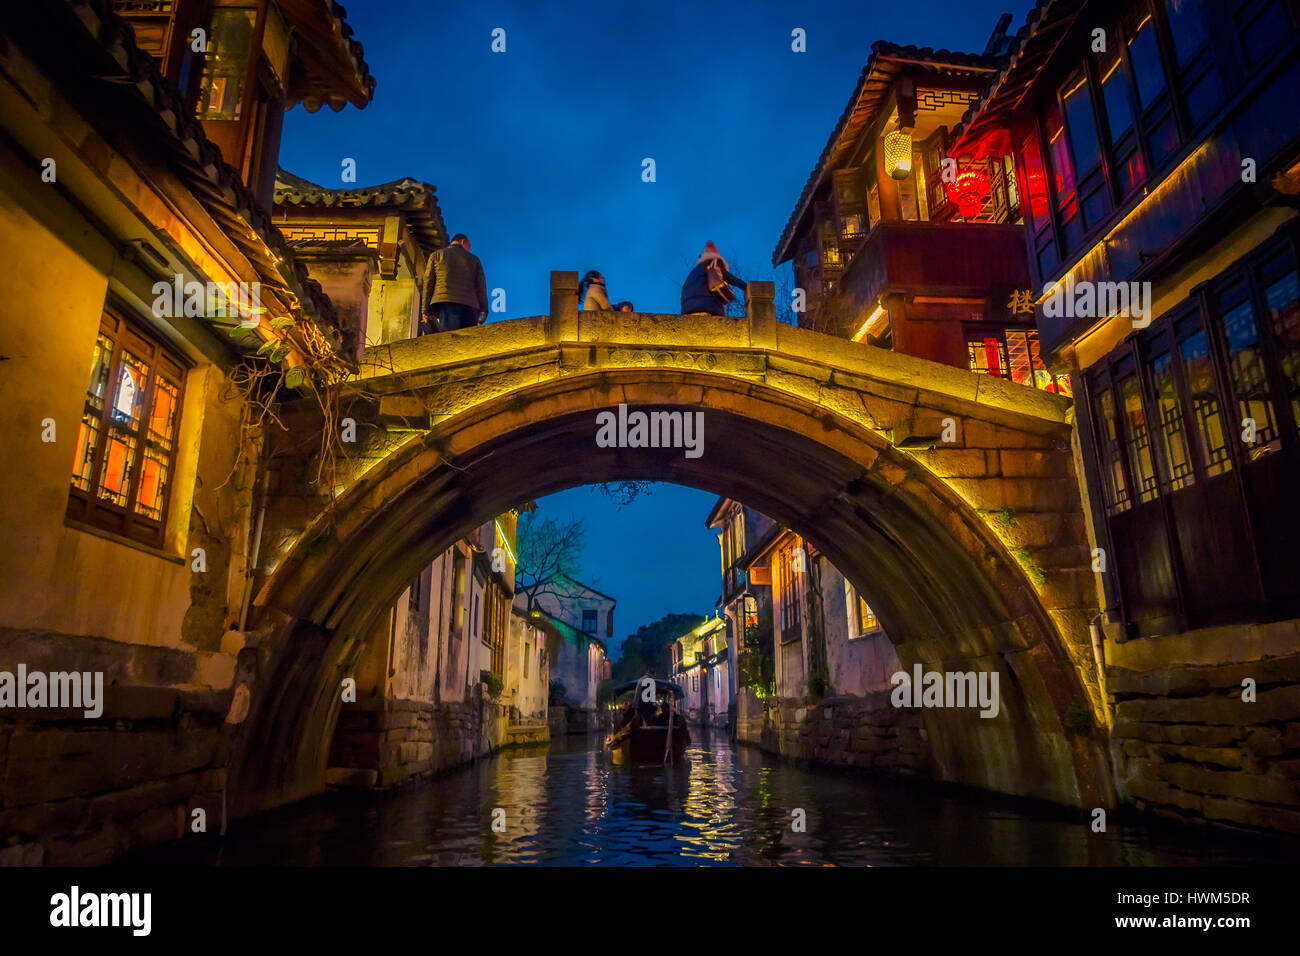 SHANGHAI, CHINA: Beautiful evening light creates magic mood inside Zhouzhuang water town, ancient city district with channels and old buildings, charming popular tourist area Stock Photo